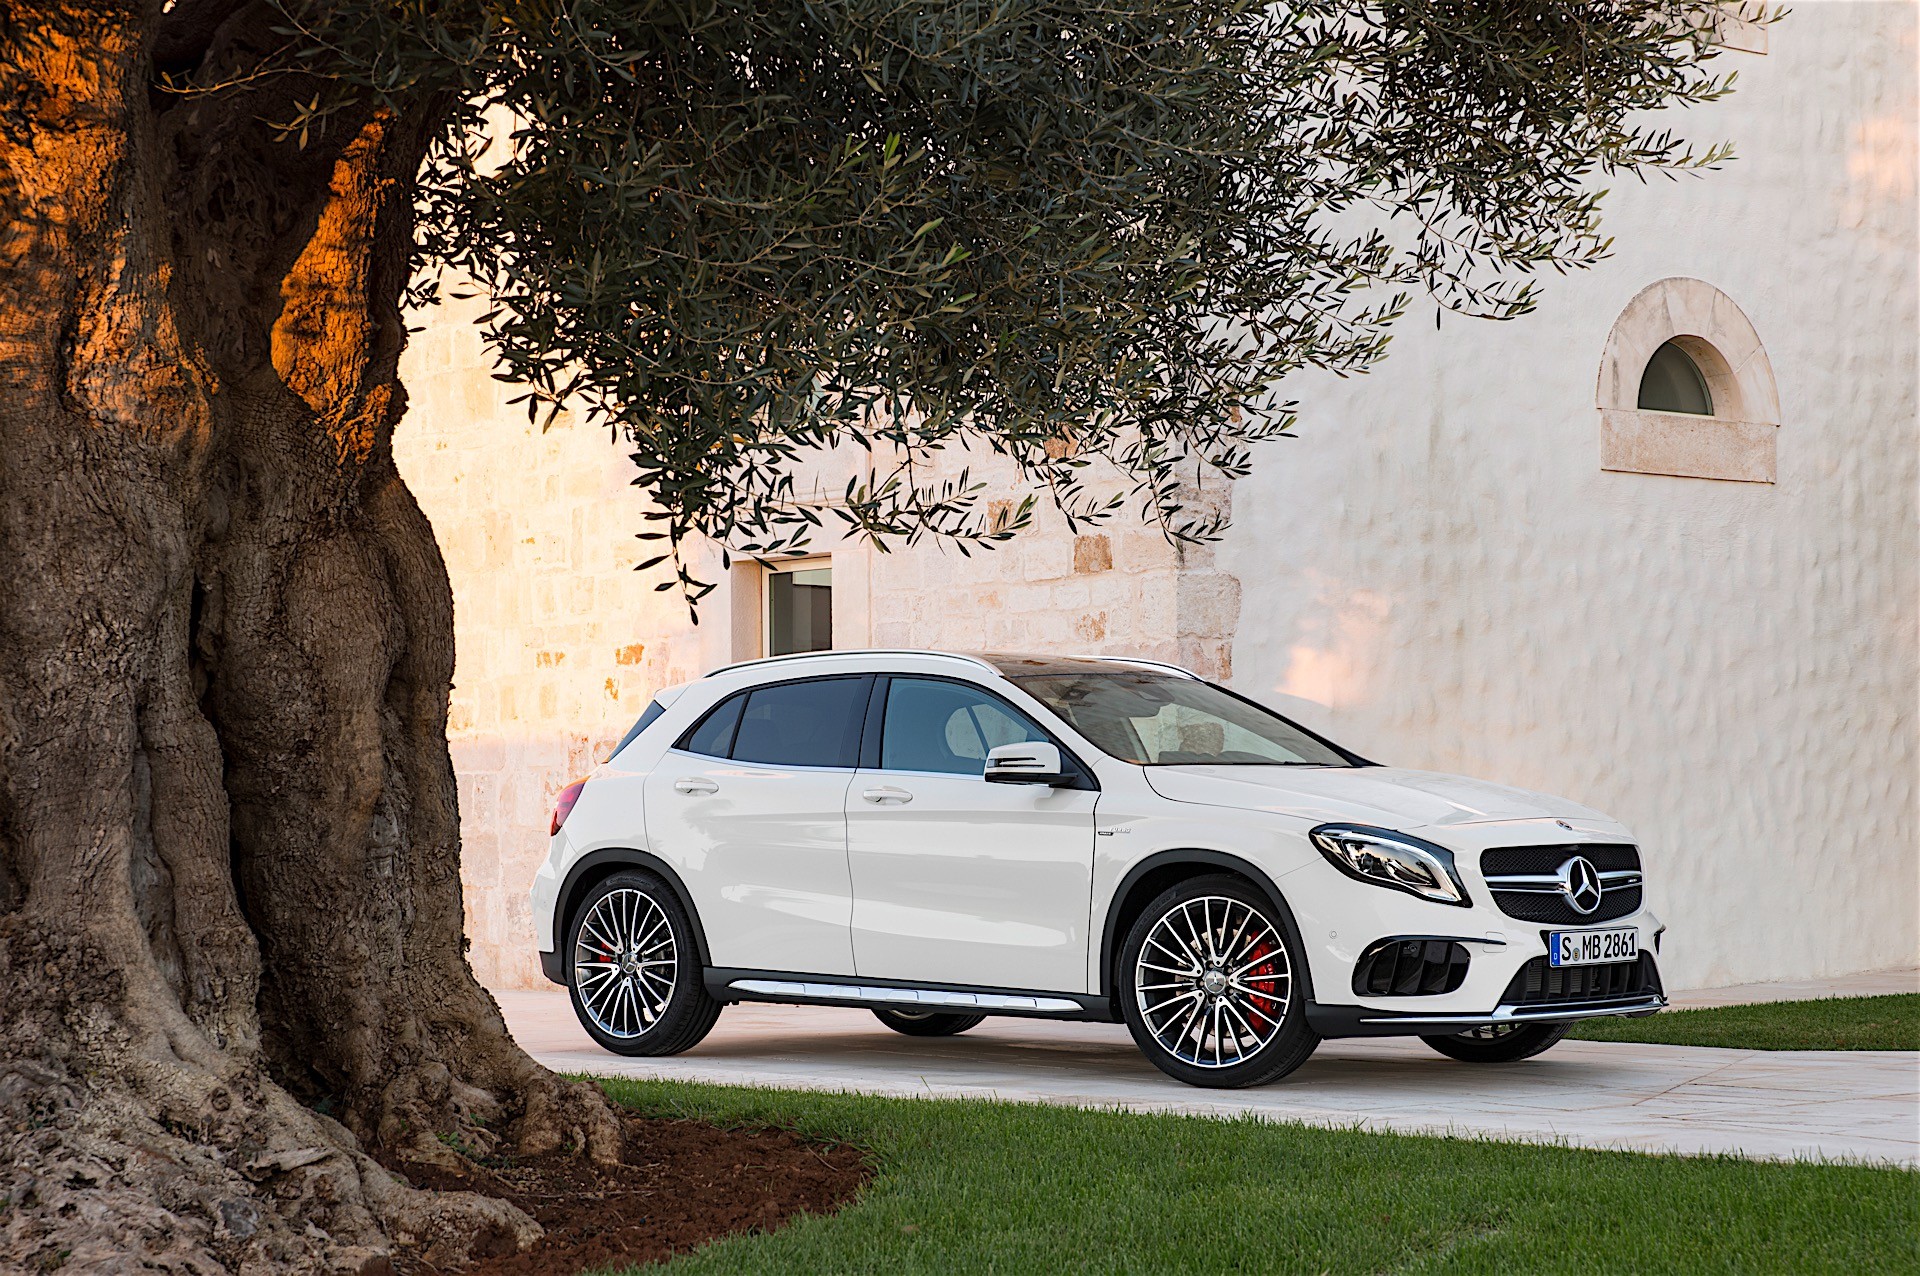 Mercedes GLA Facelift : Observations after a day of driving